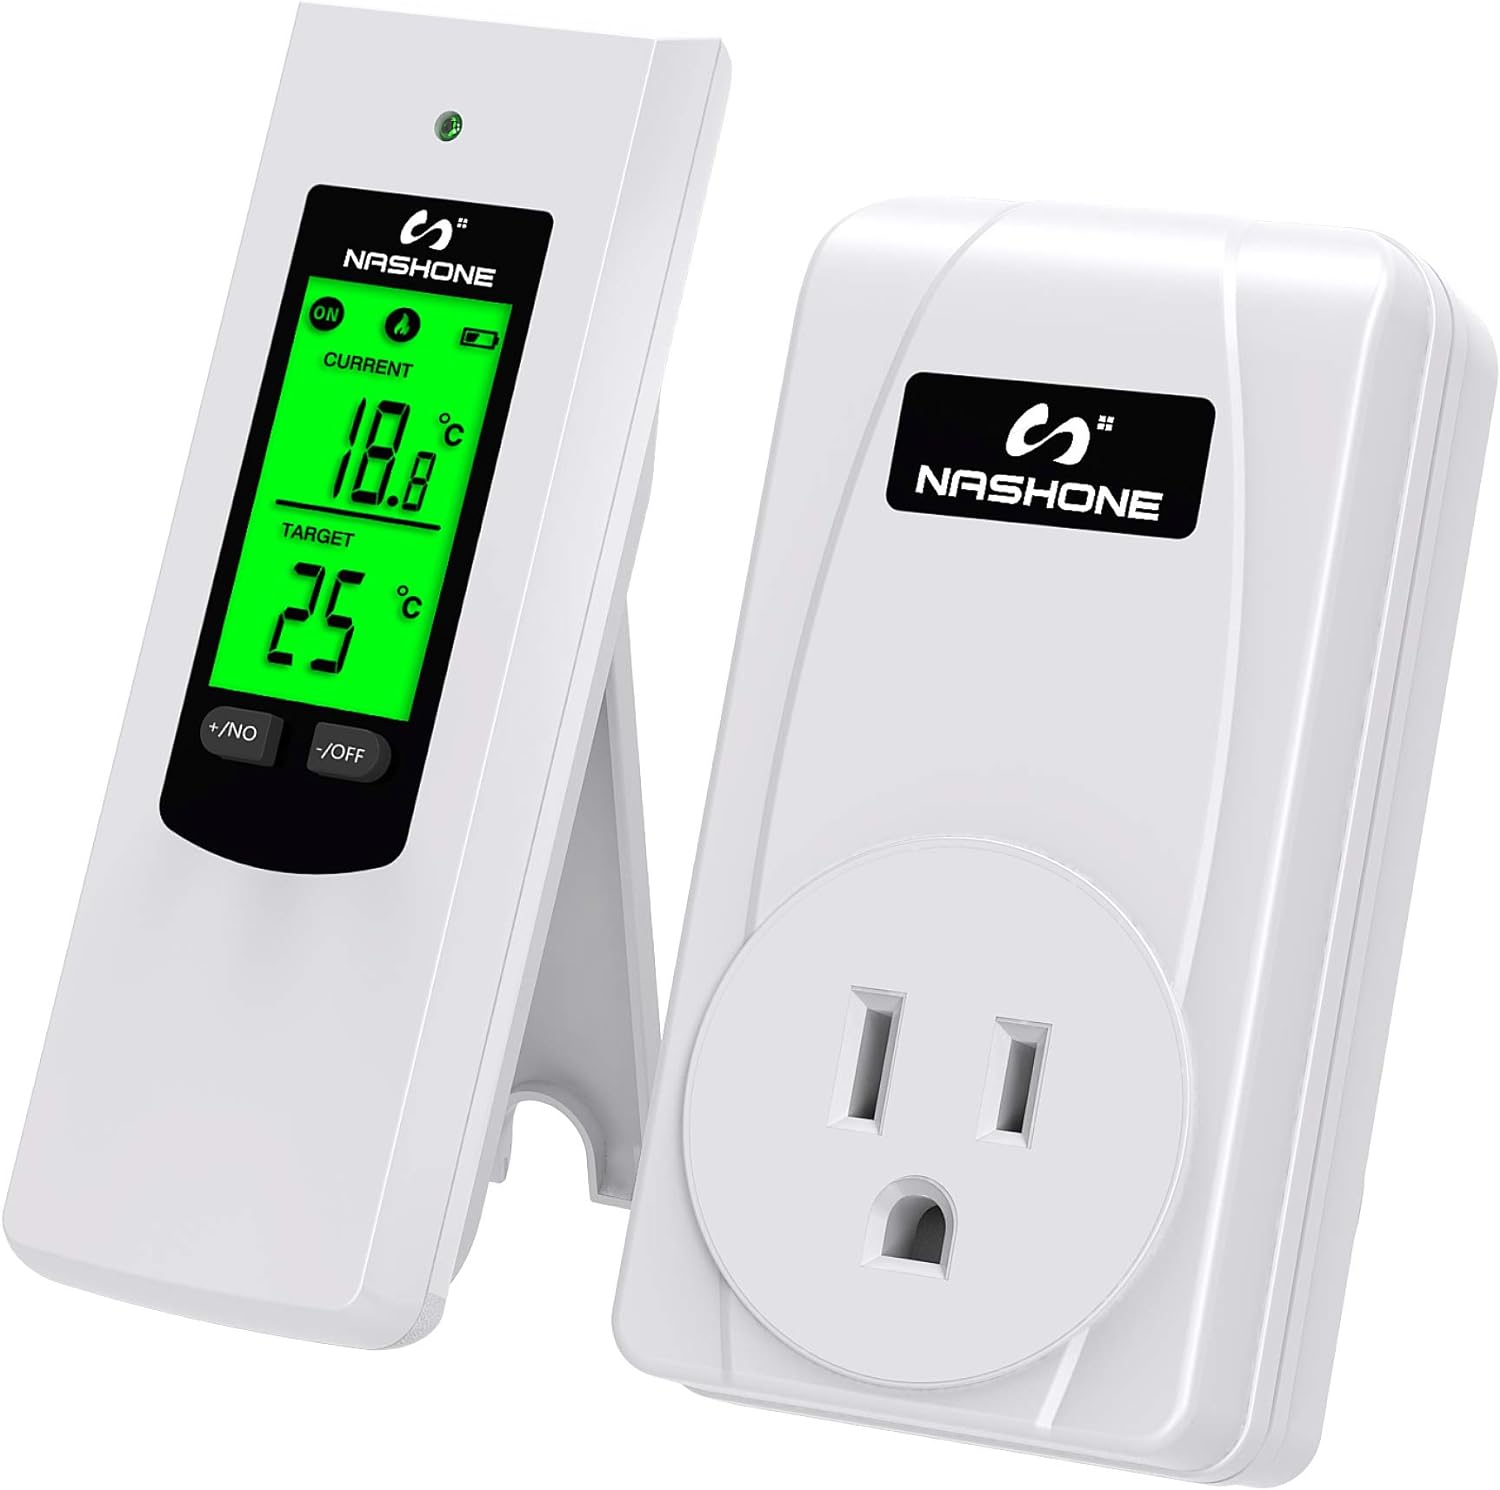 Nashone Wireless Plug in Thermostat, Digital Thermostat Outlet LCD Display Temperature Controller with Heating and Cooling Mode